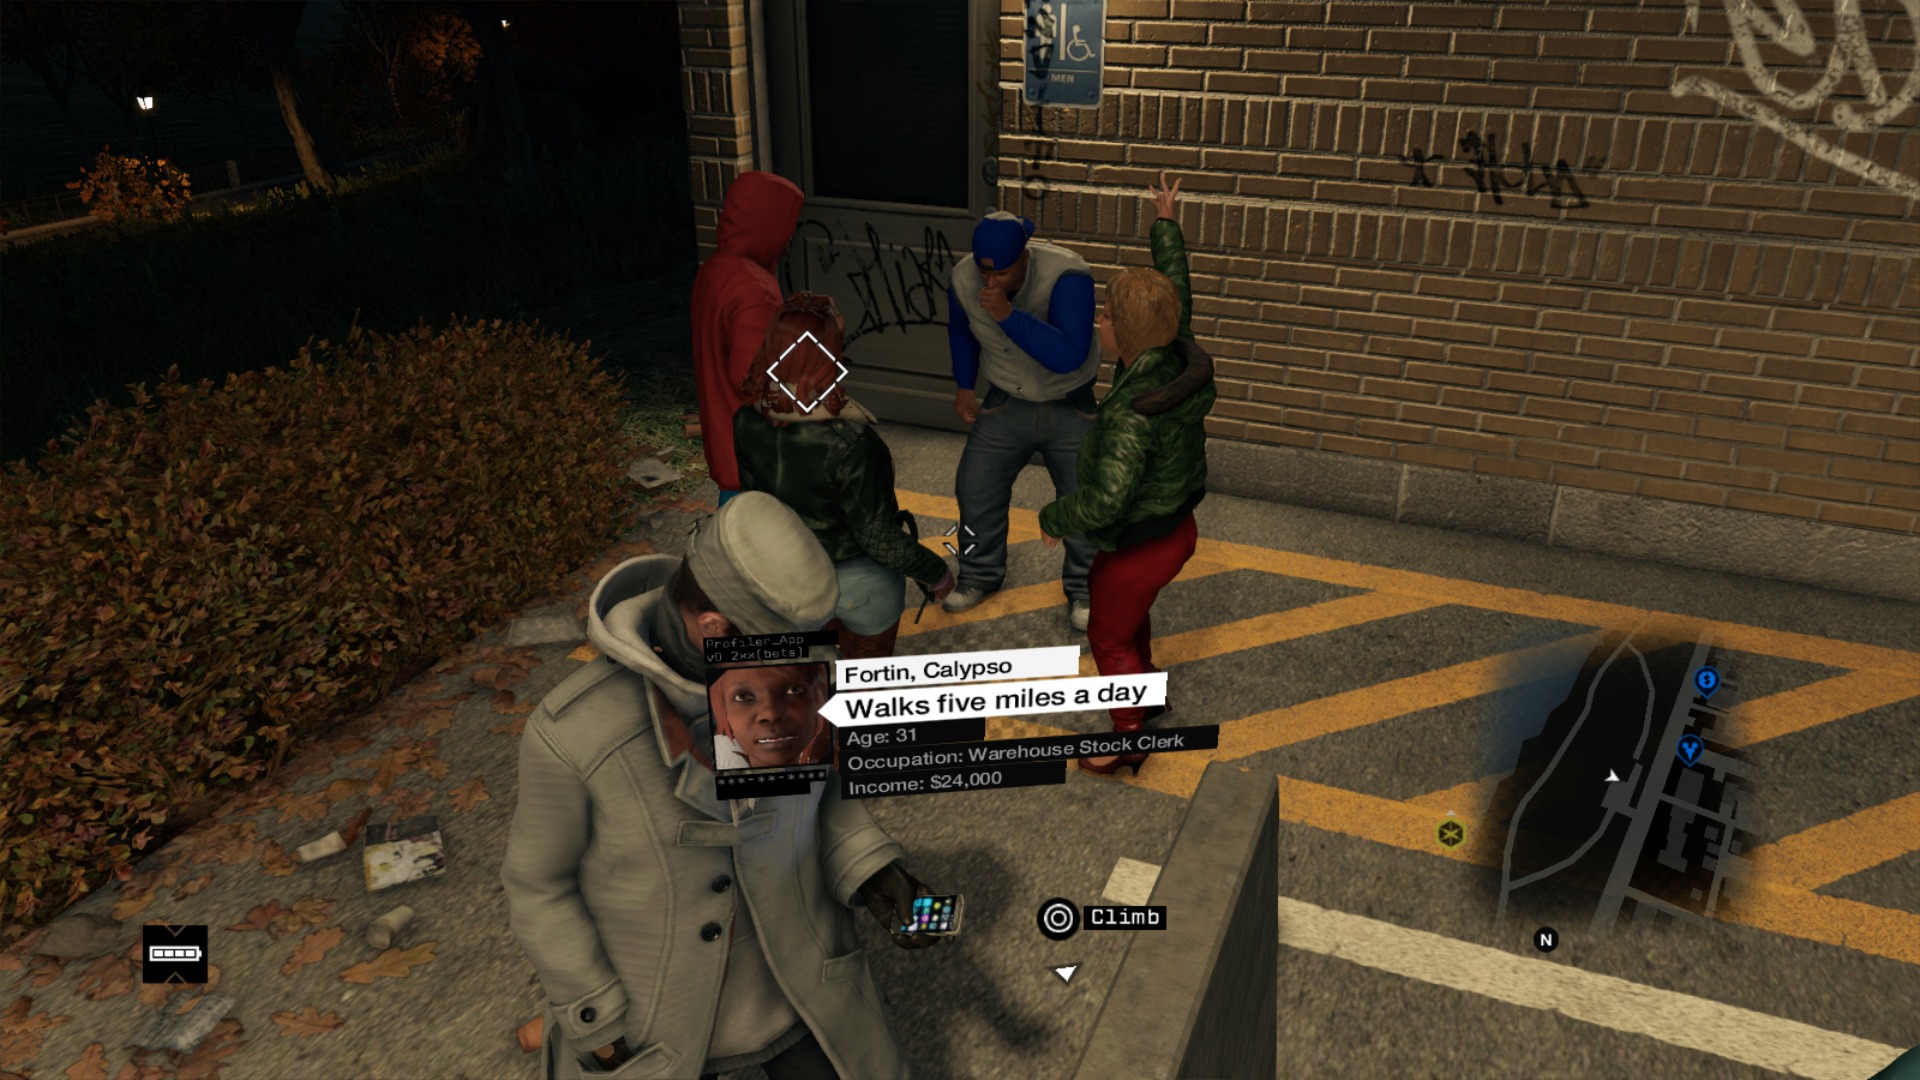 WATCH_DOGS™_20140602152530